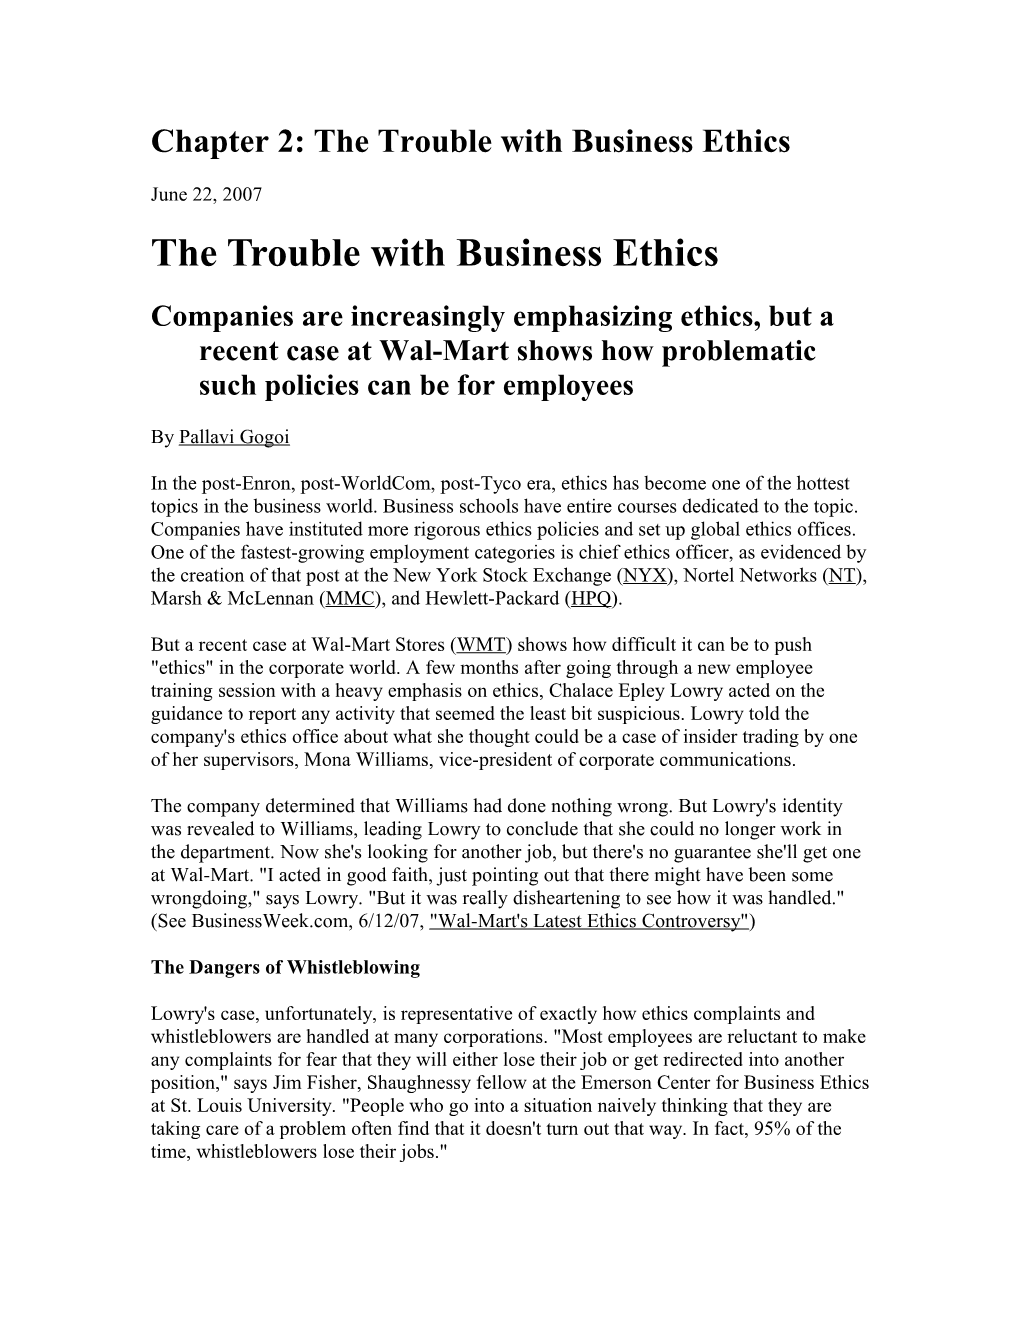 Chapter 2: the Trouble with Business Ethics